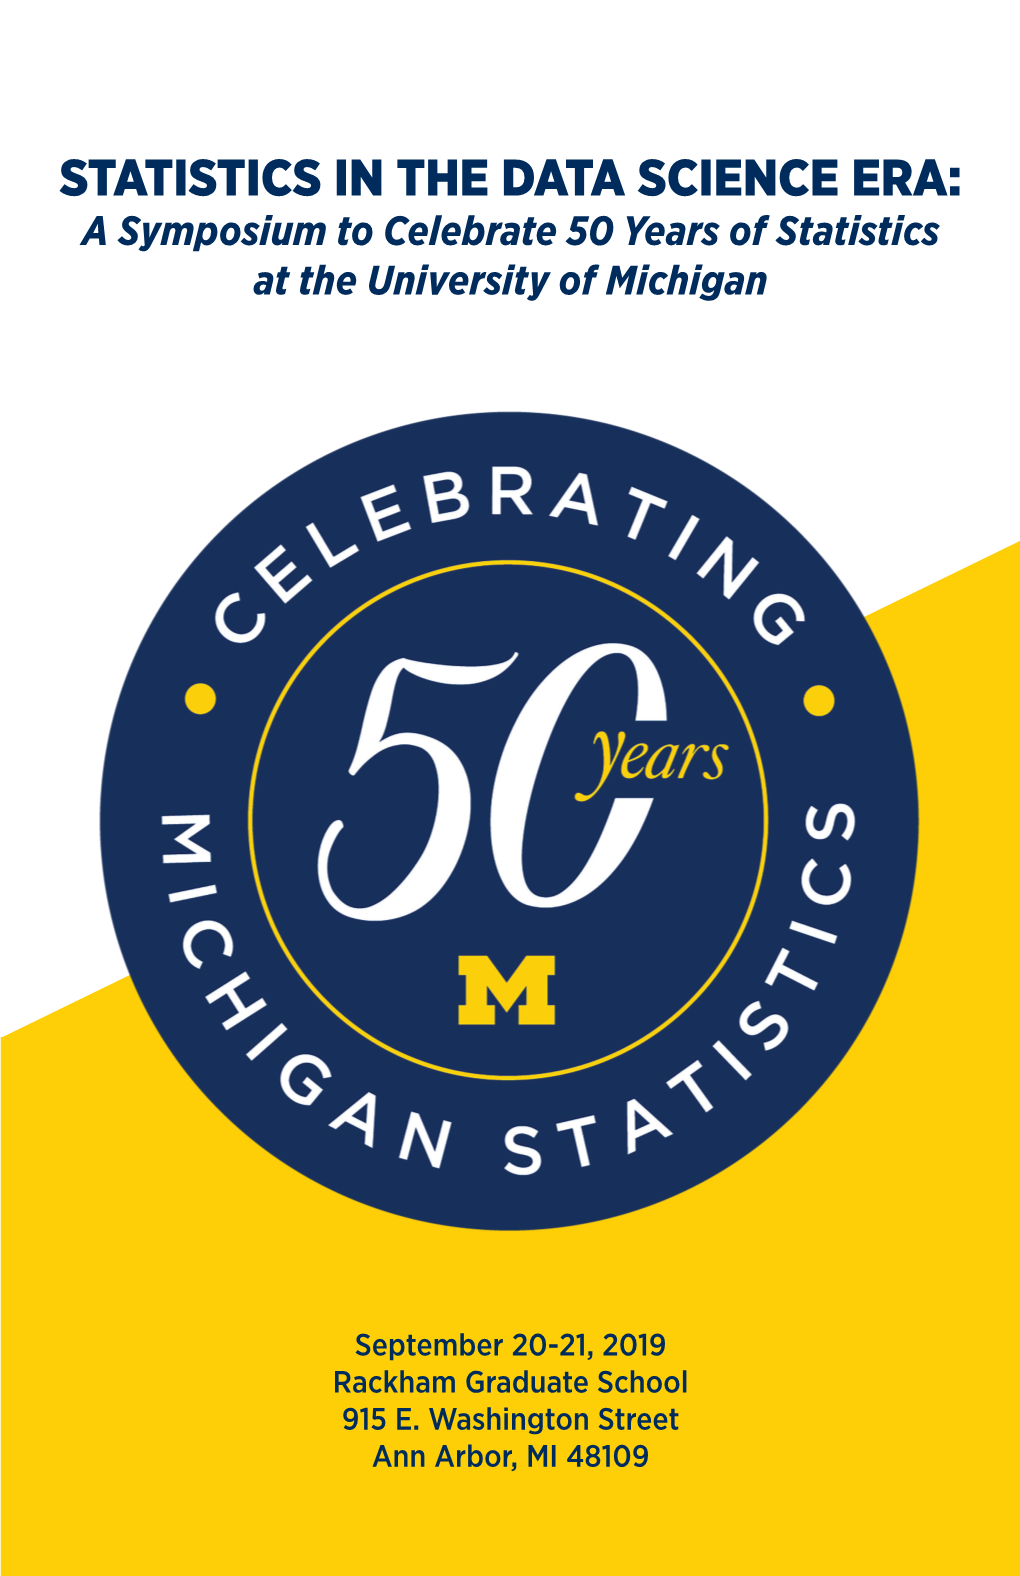 STATISTICS in the DATA SCIENCE ERA: a Symposium to Celebrate 50 Years of Statistics at the University of Michigan